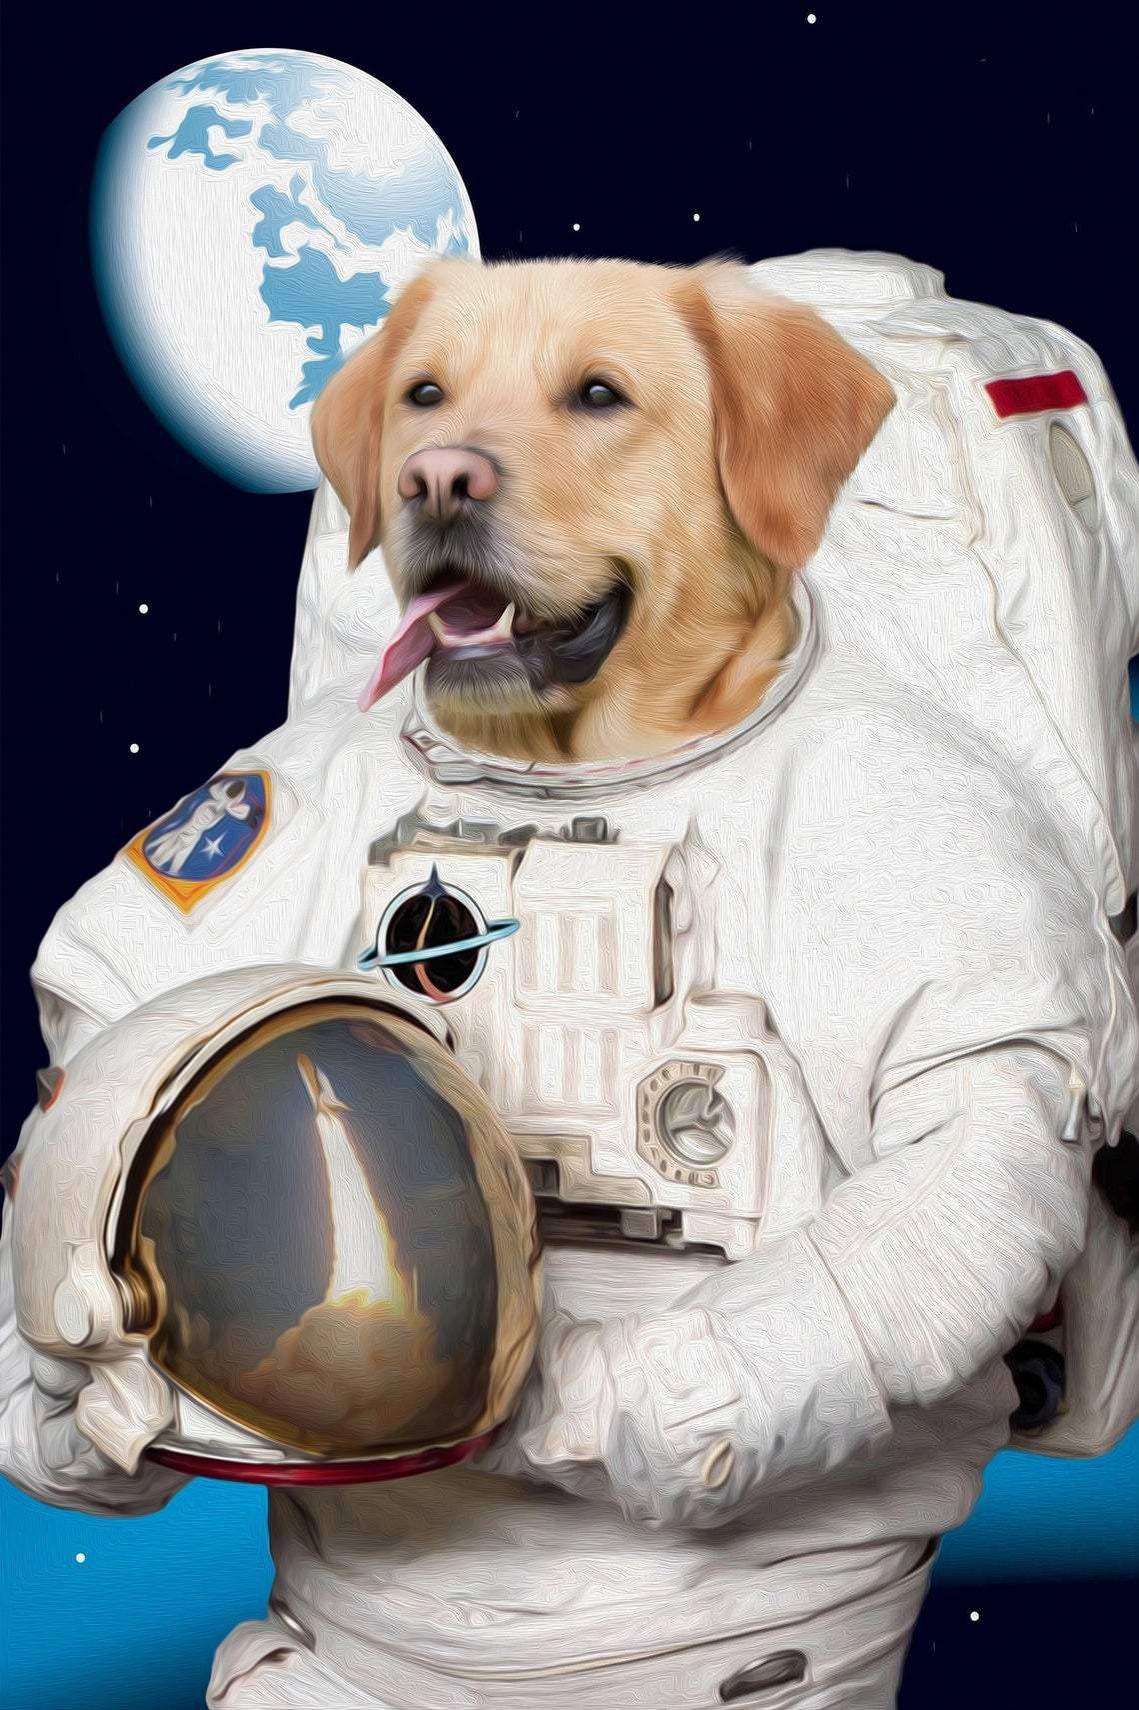 The portrait shows a dog dressed in the white clothes of an American astronaut near the moon